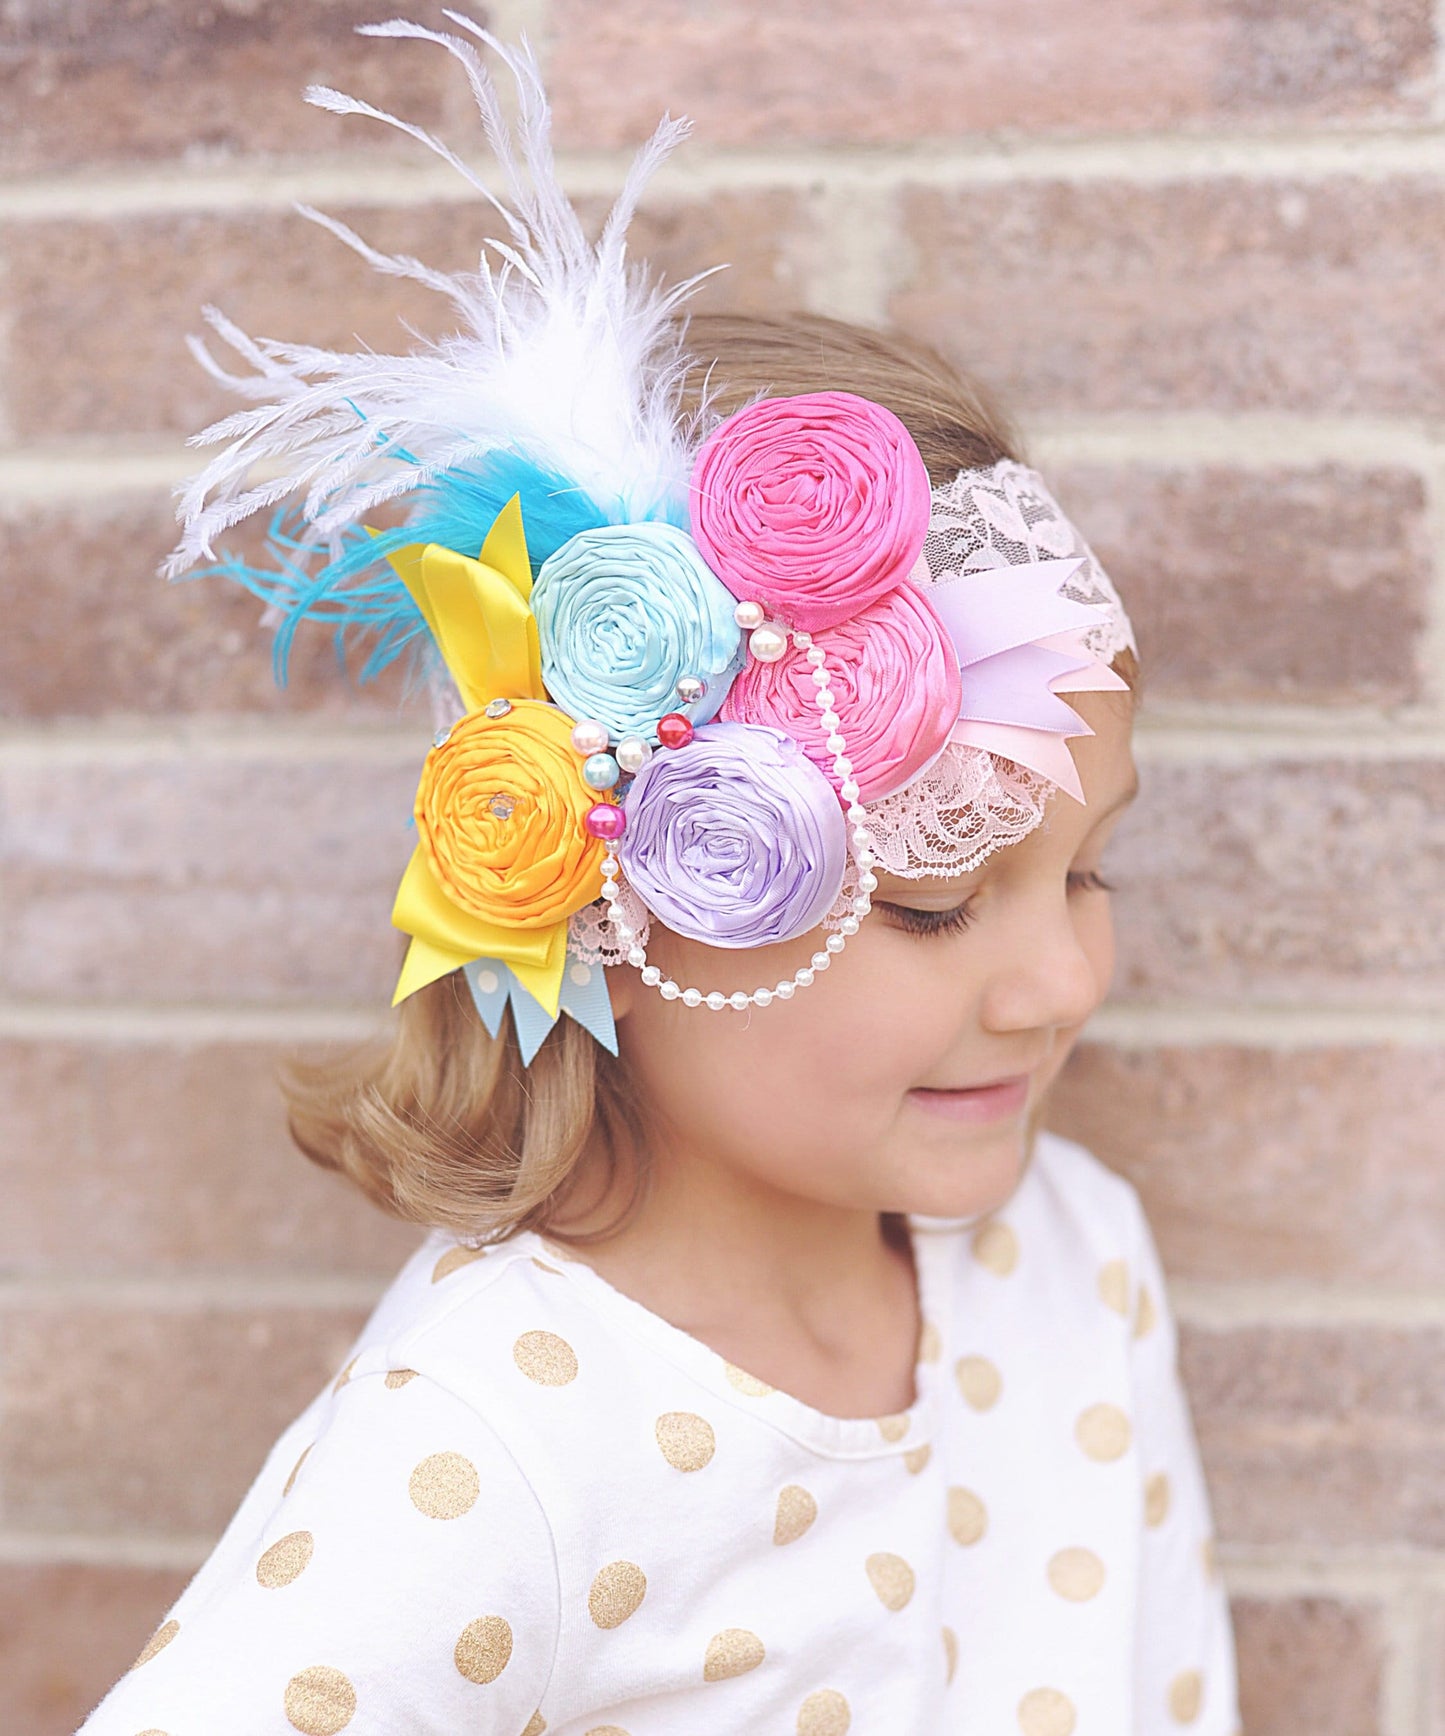 Pastel Flowers and Feathers Headband- Flower Headband, Flower Crown, Flower Headpiece, Flower Girl, Boho Flower Crown, flower crown headband